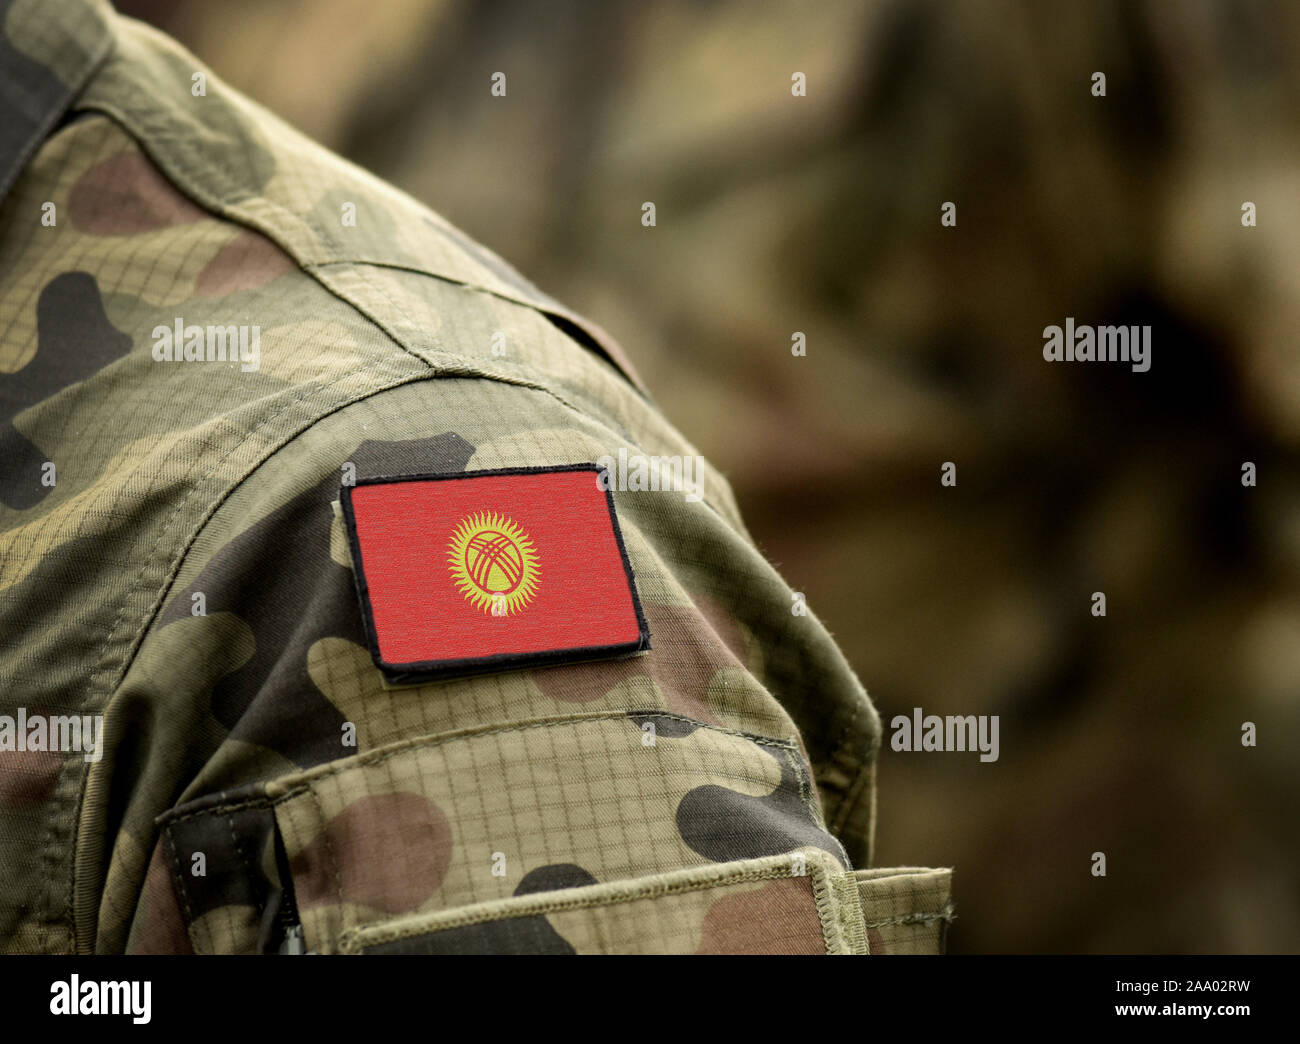 Flag of Kyrgyzstan on military uniform. Army, armed forces, soldiers. Collage. Stock Photo